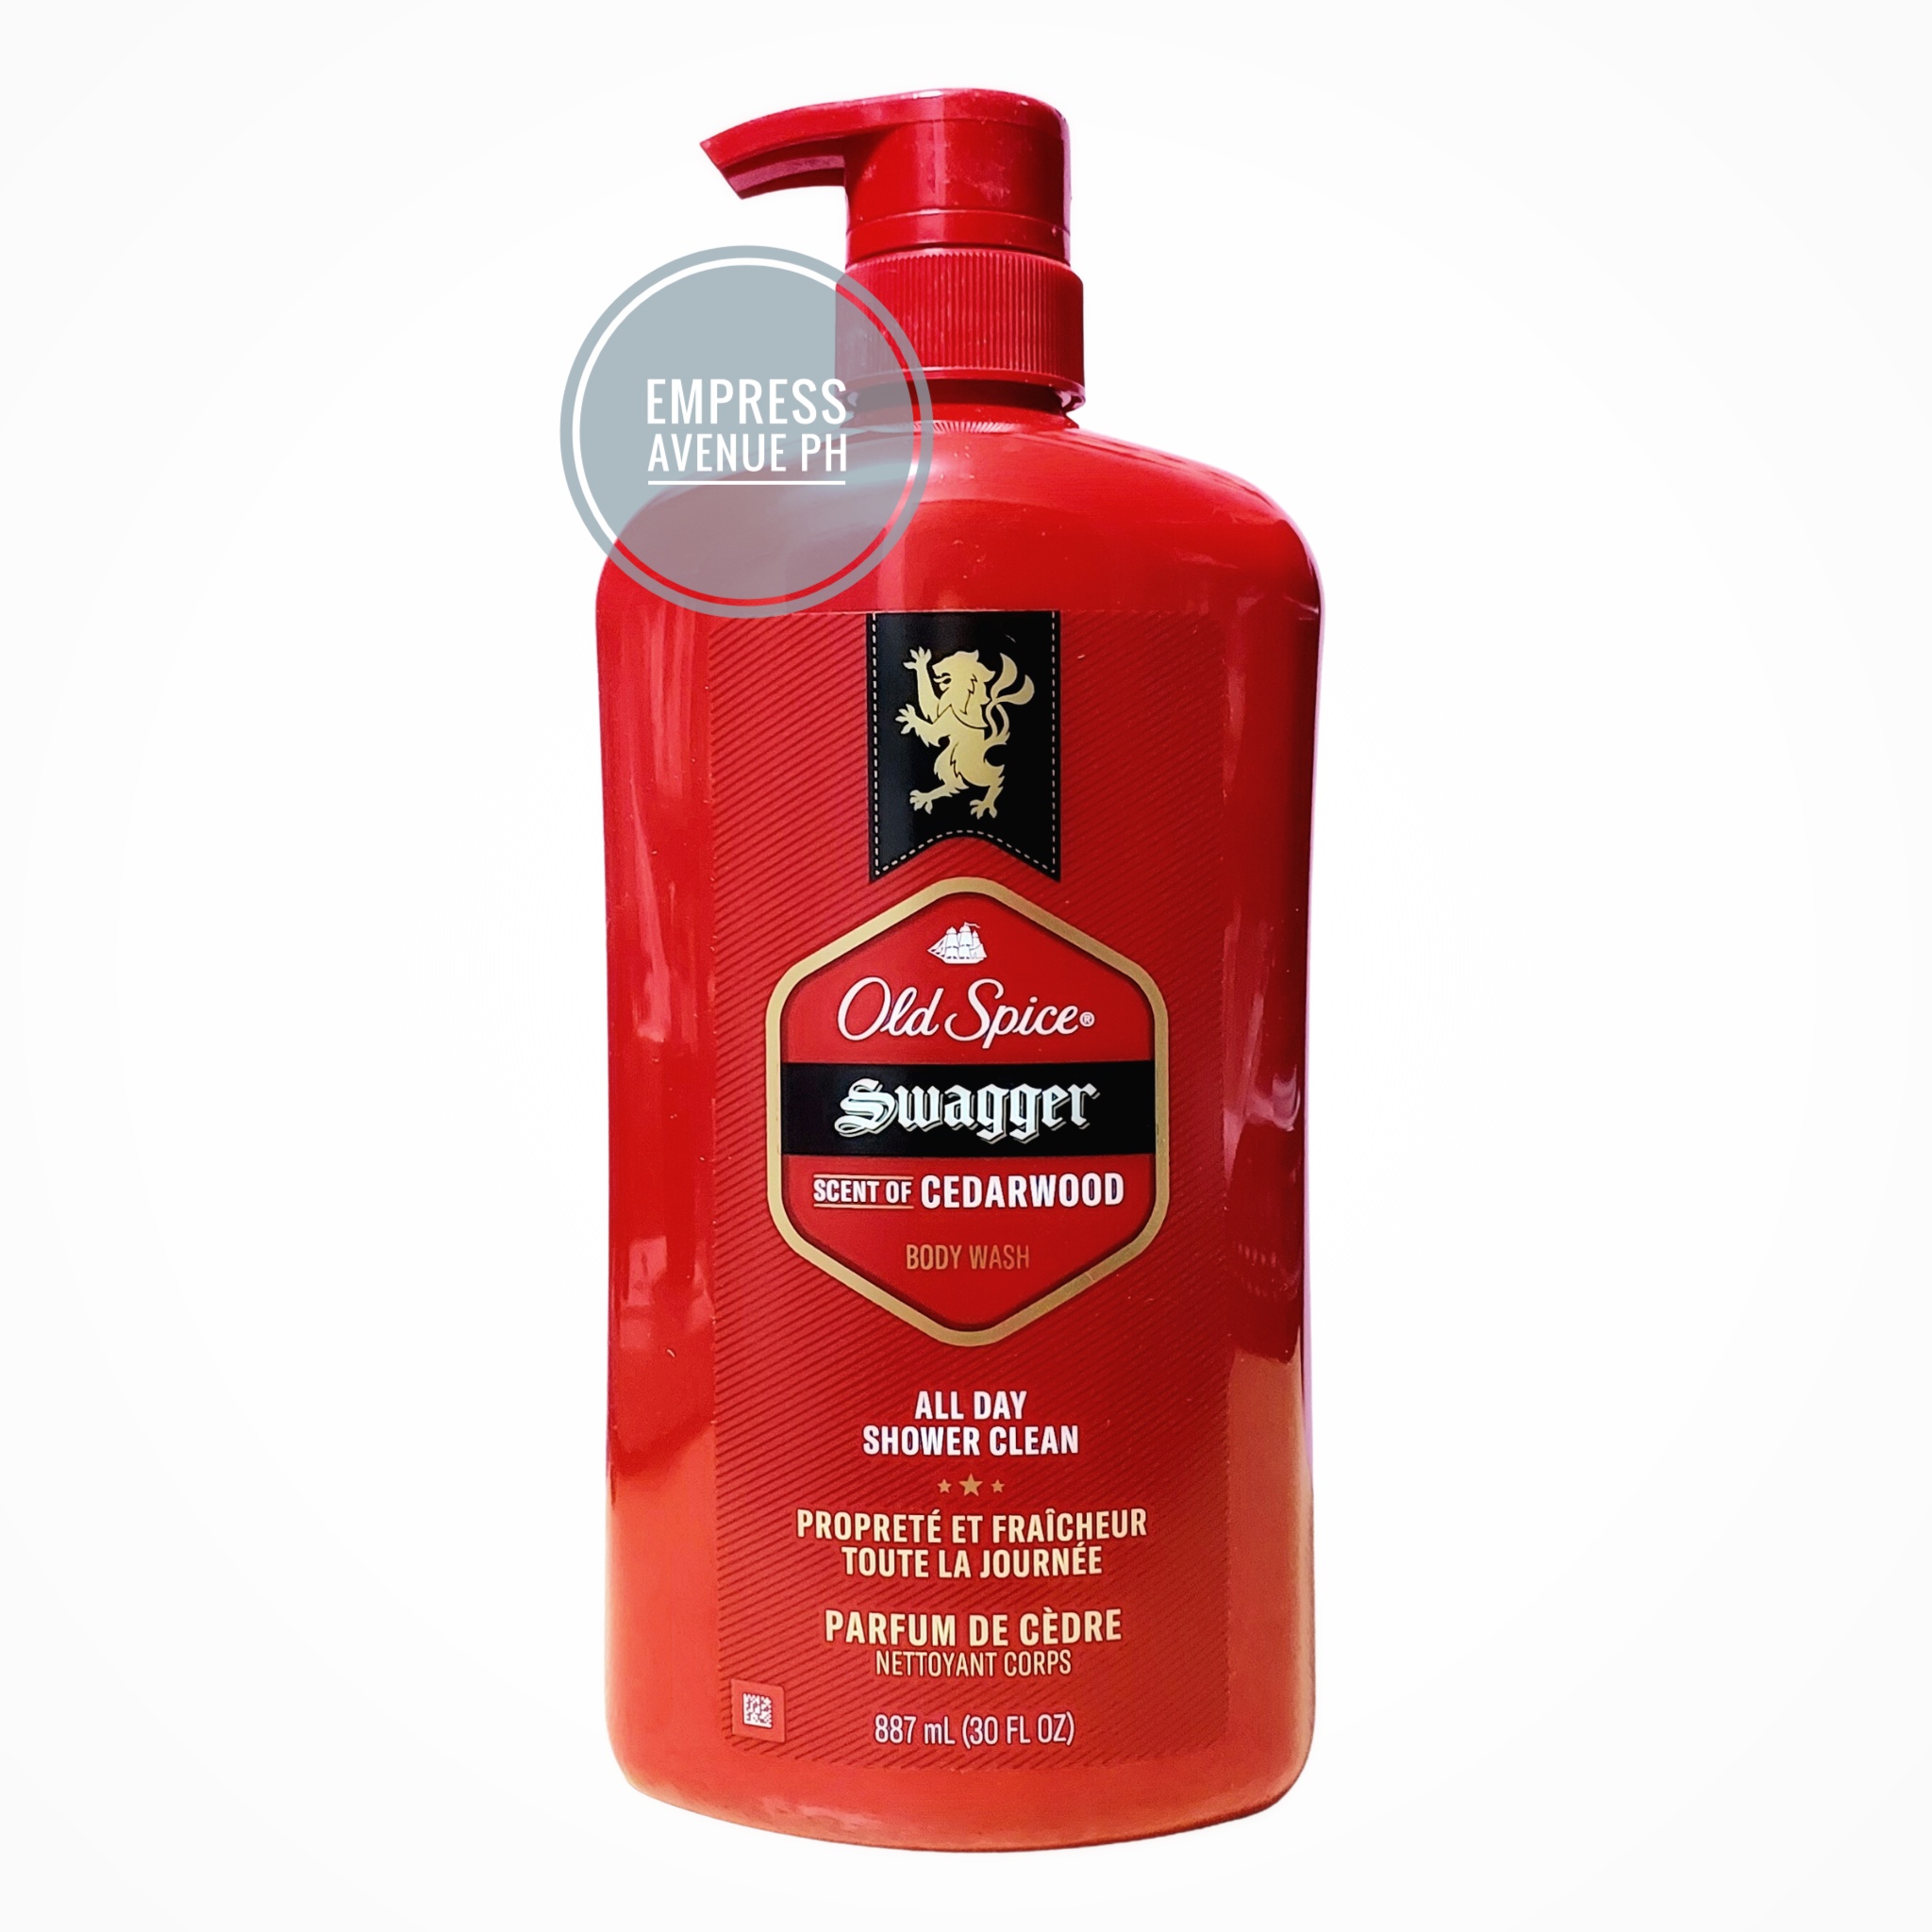 Old Spice Swagger Body Wash, Scent of Cedarwood, All Day Shower